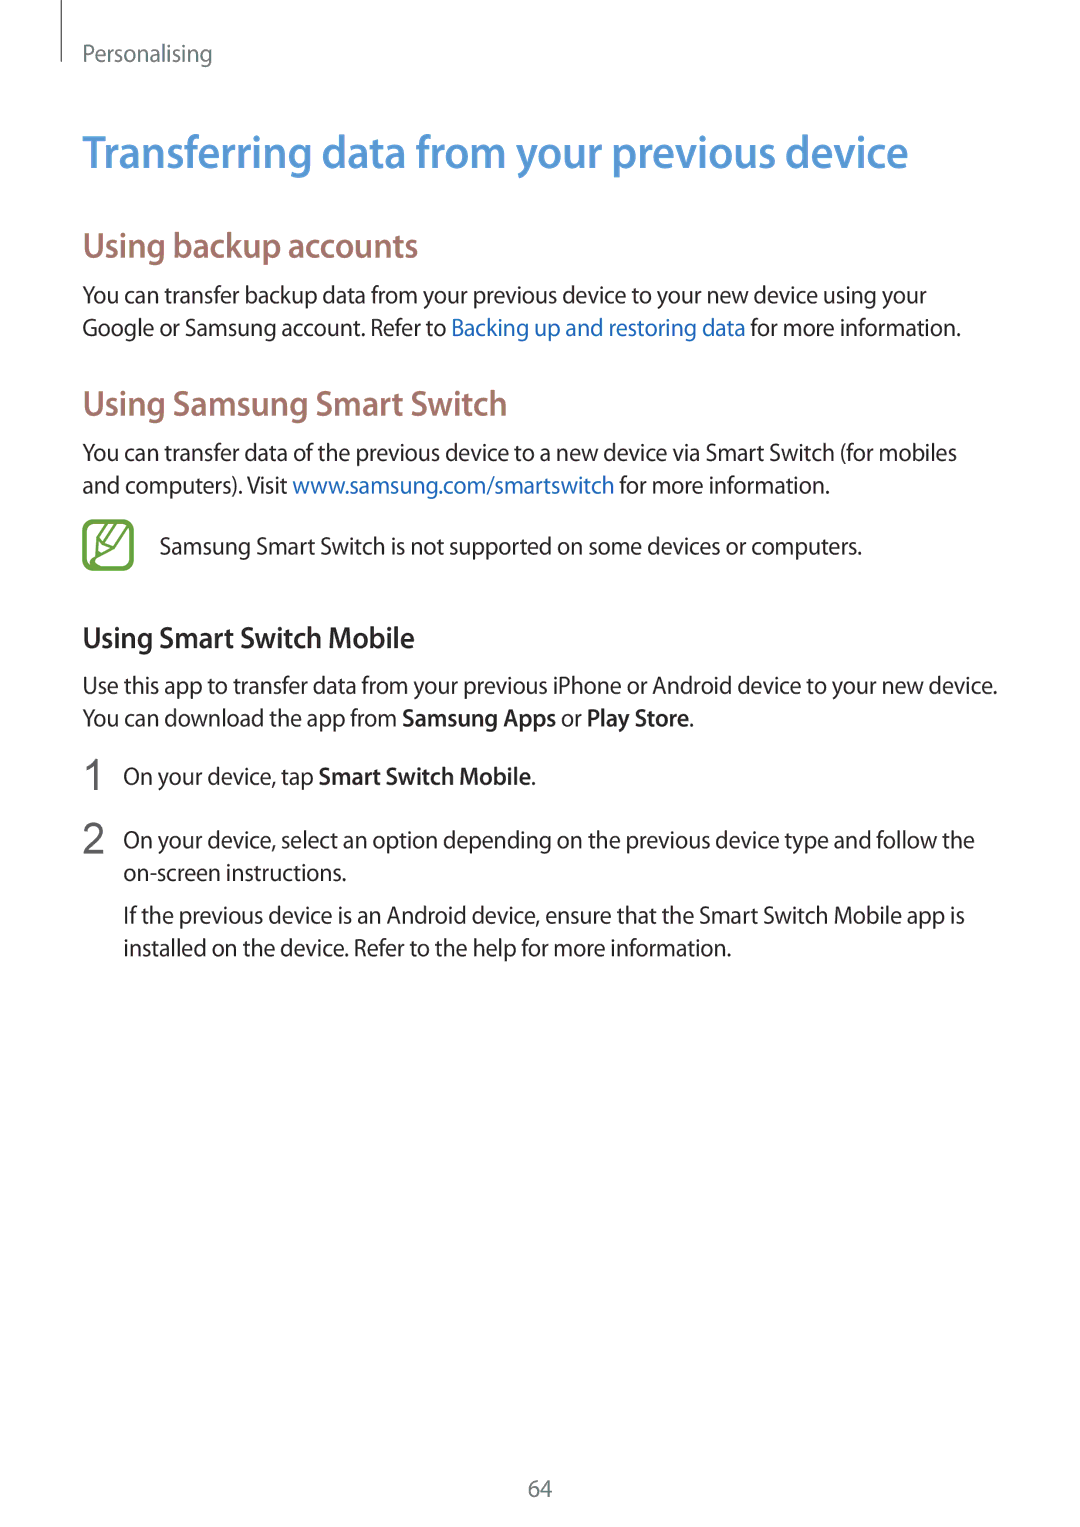 Samsung SM-T805NZWAXSK Transferring data from your previous device, Using backup accounts, Using Samsung Smart Switch 